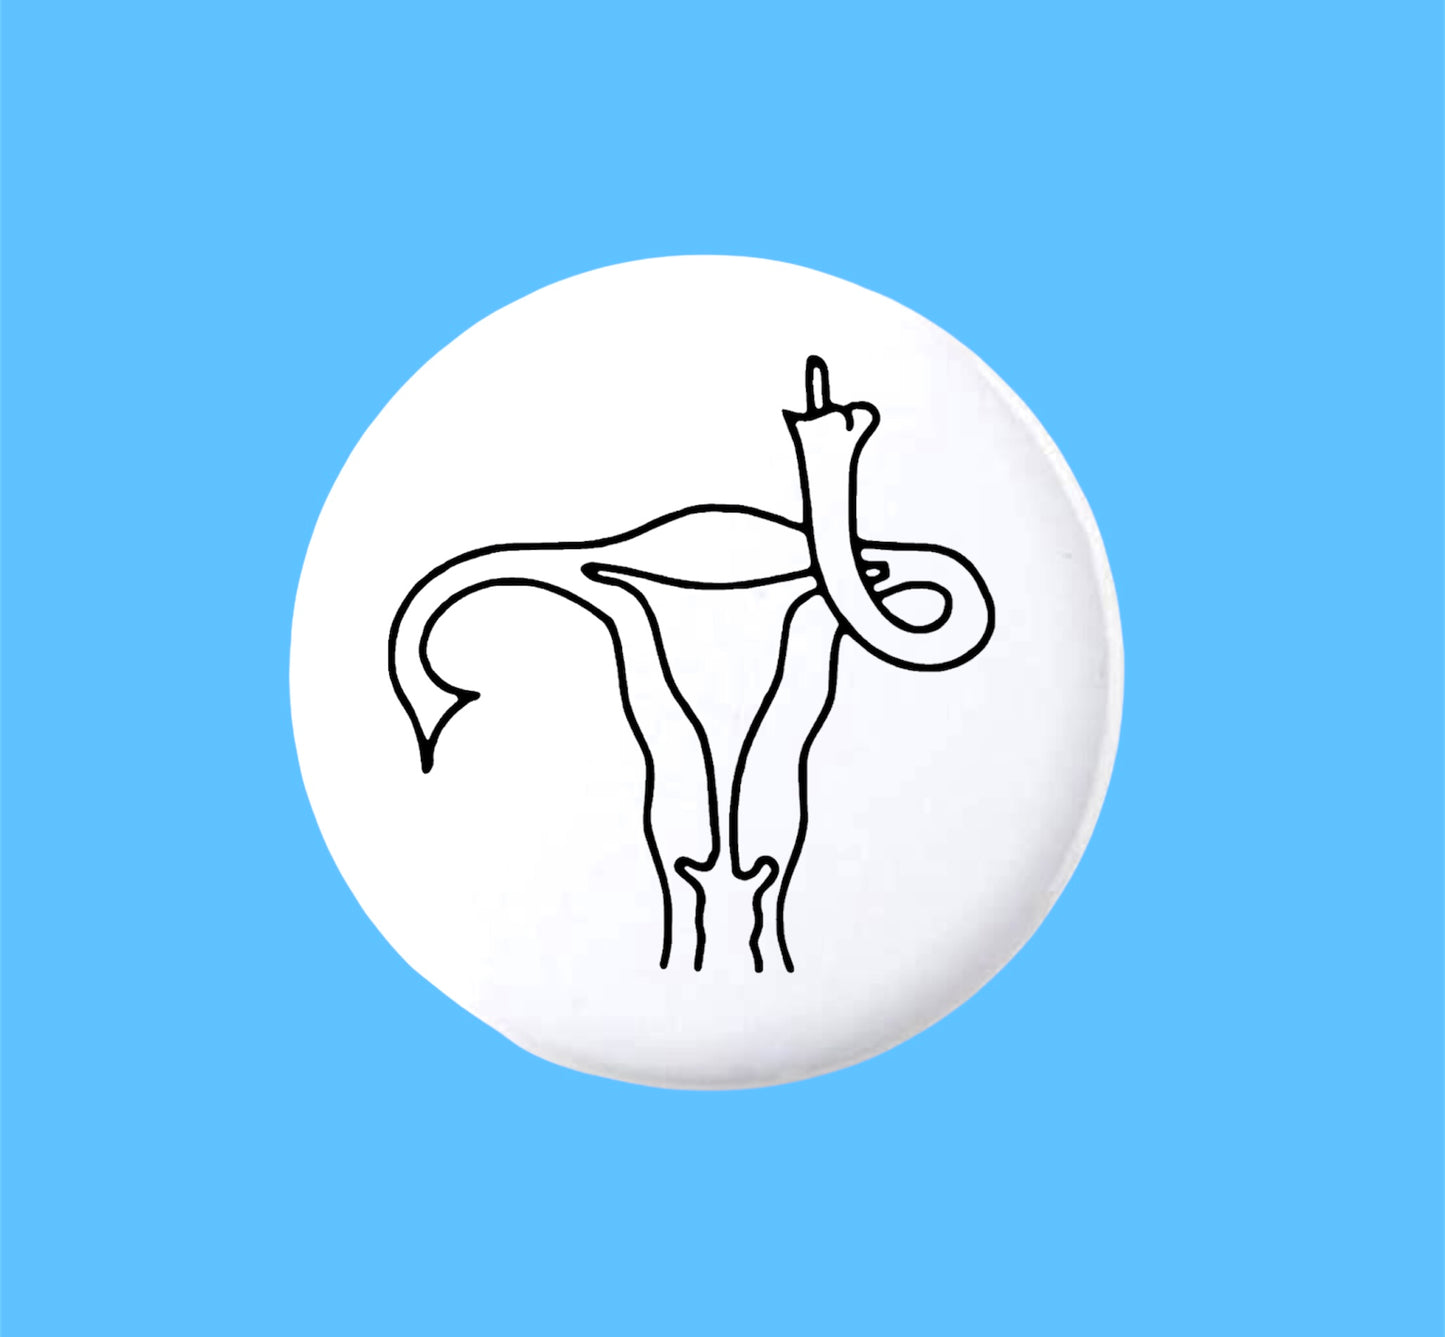 Angry uterus button